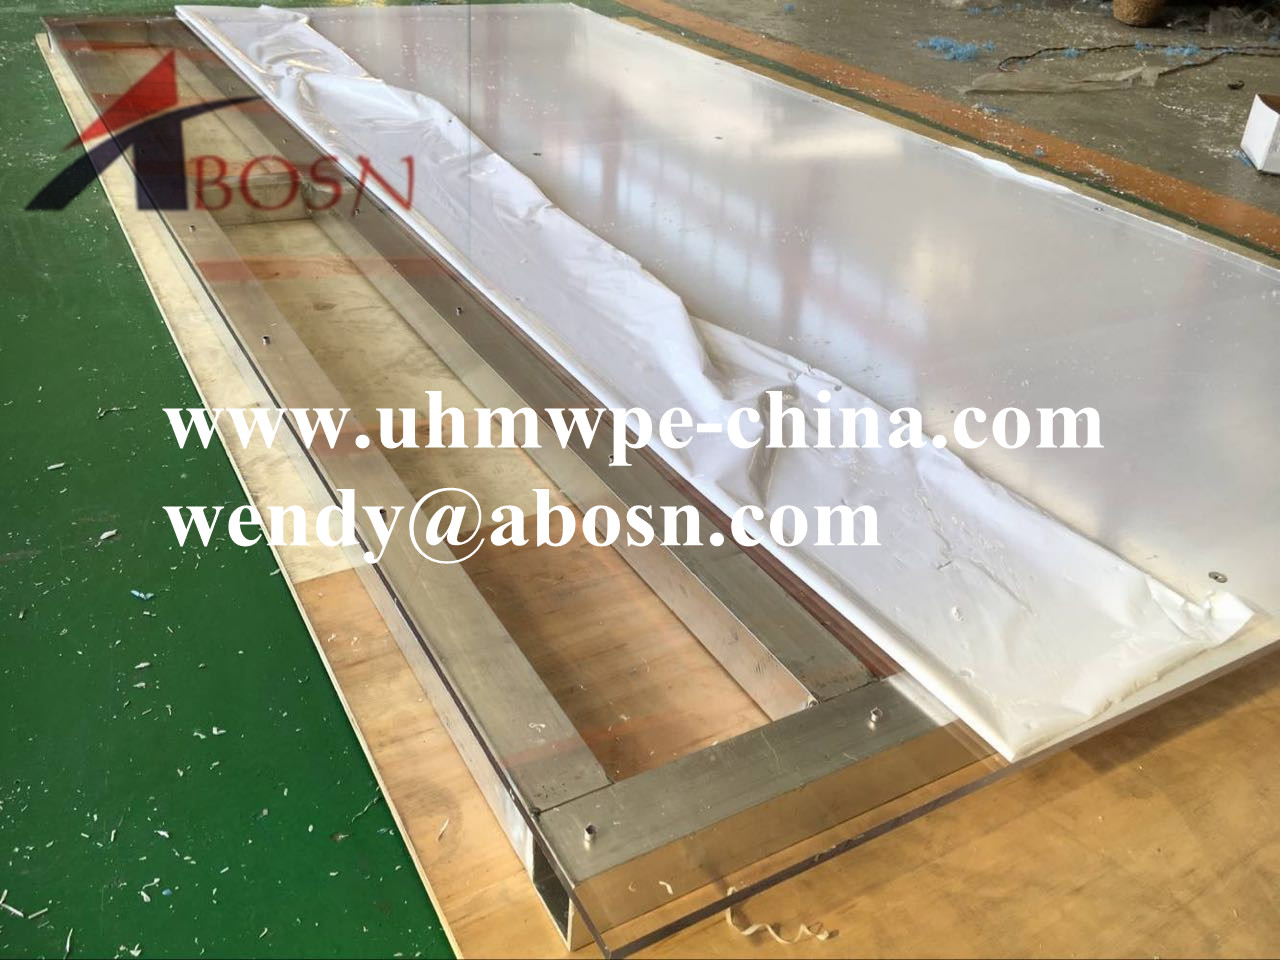 Clear Polycarbonate Dasher Boards